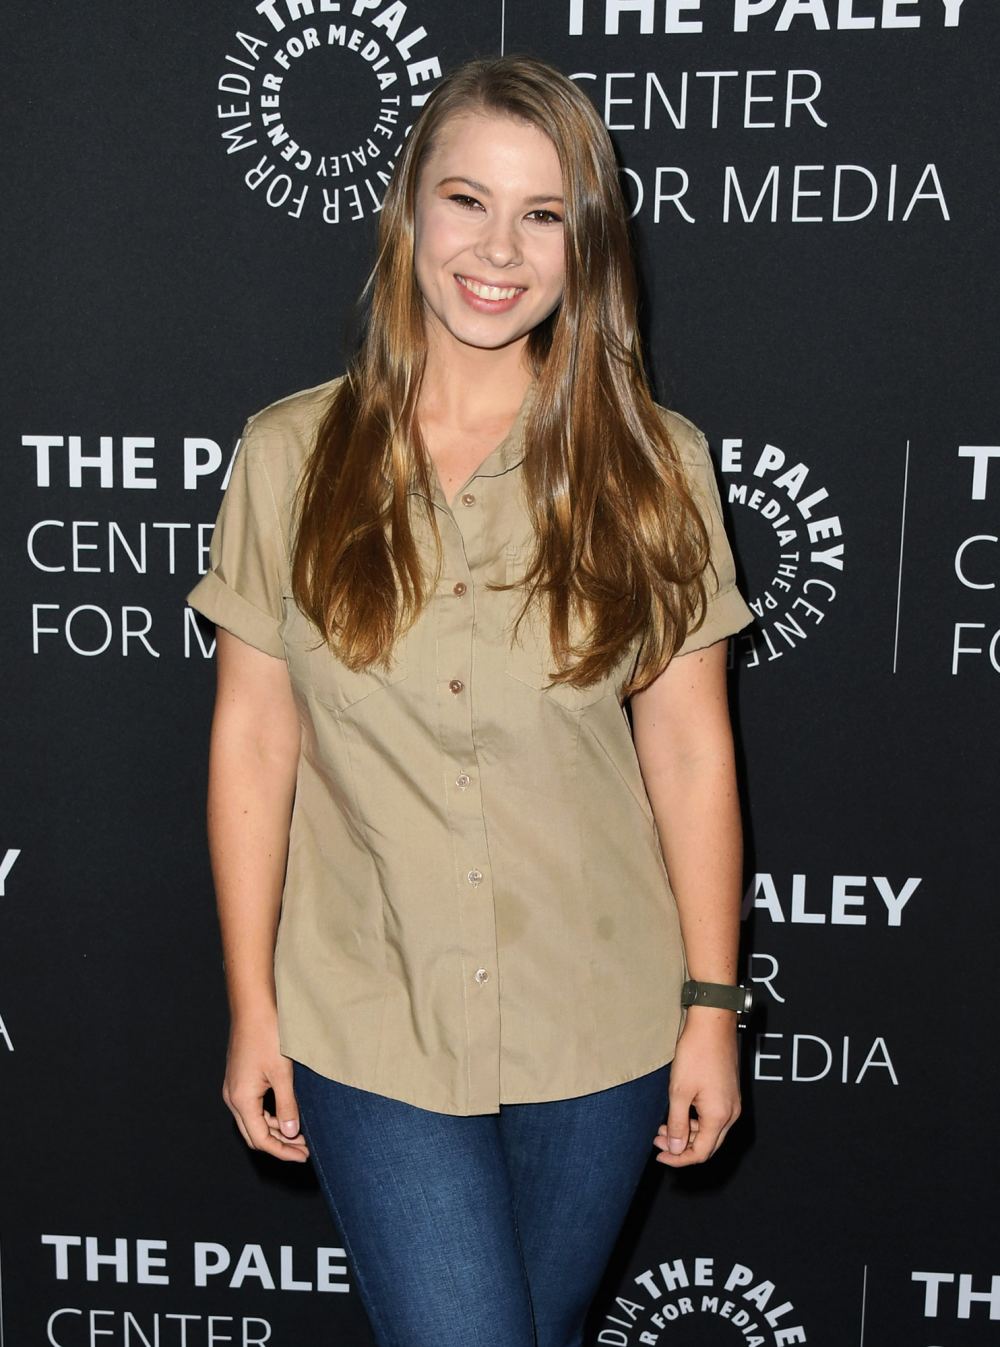 Bindi Irwin Confirms She and Boyfriend Chandler Powell Are Not Engaged